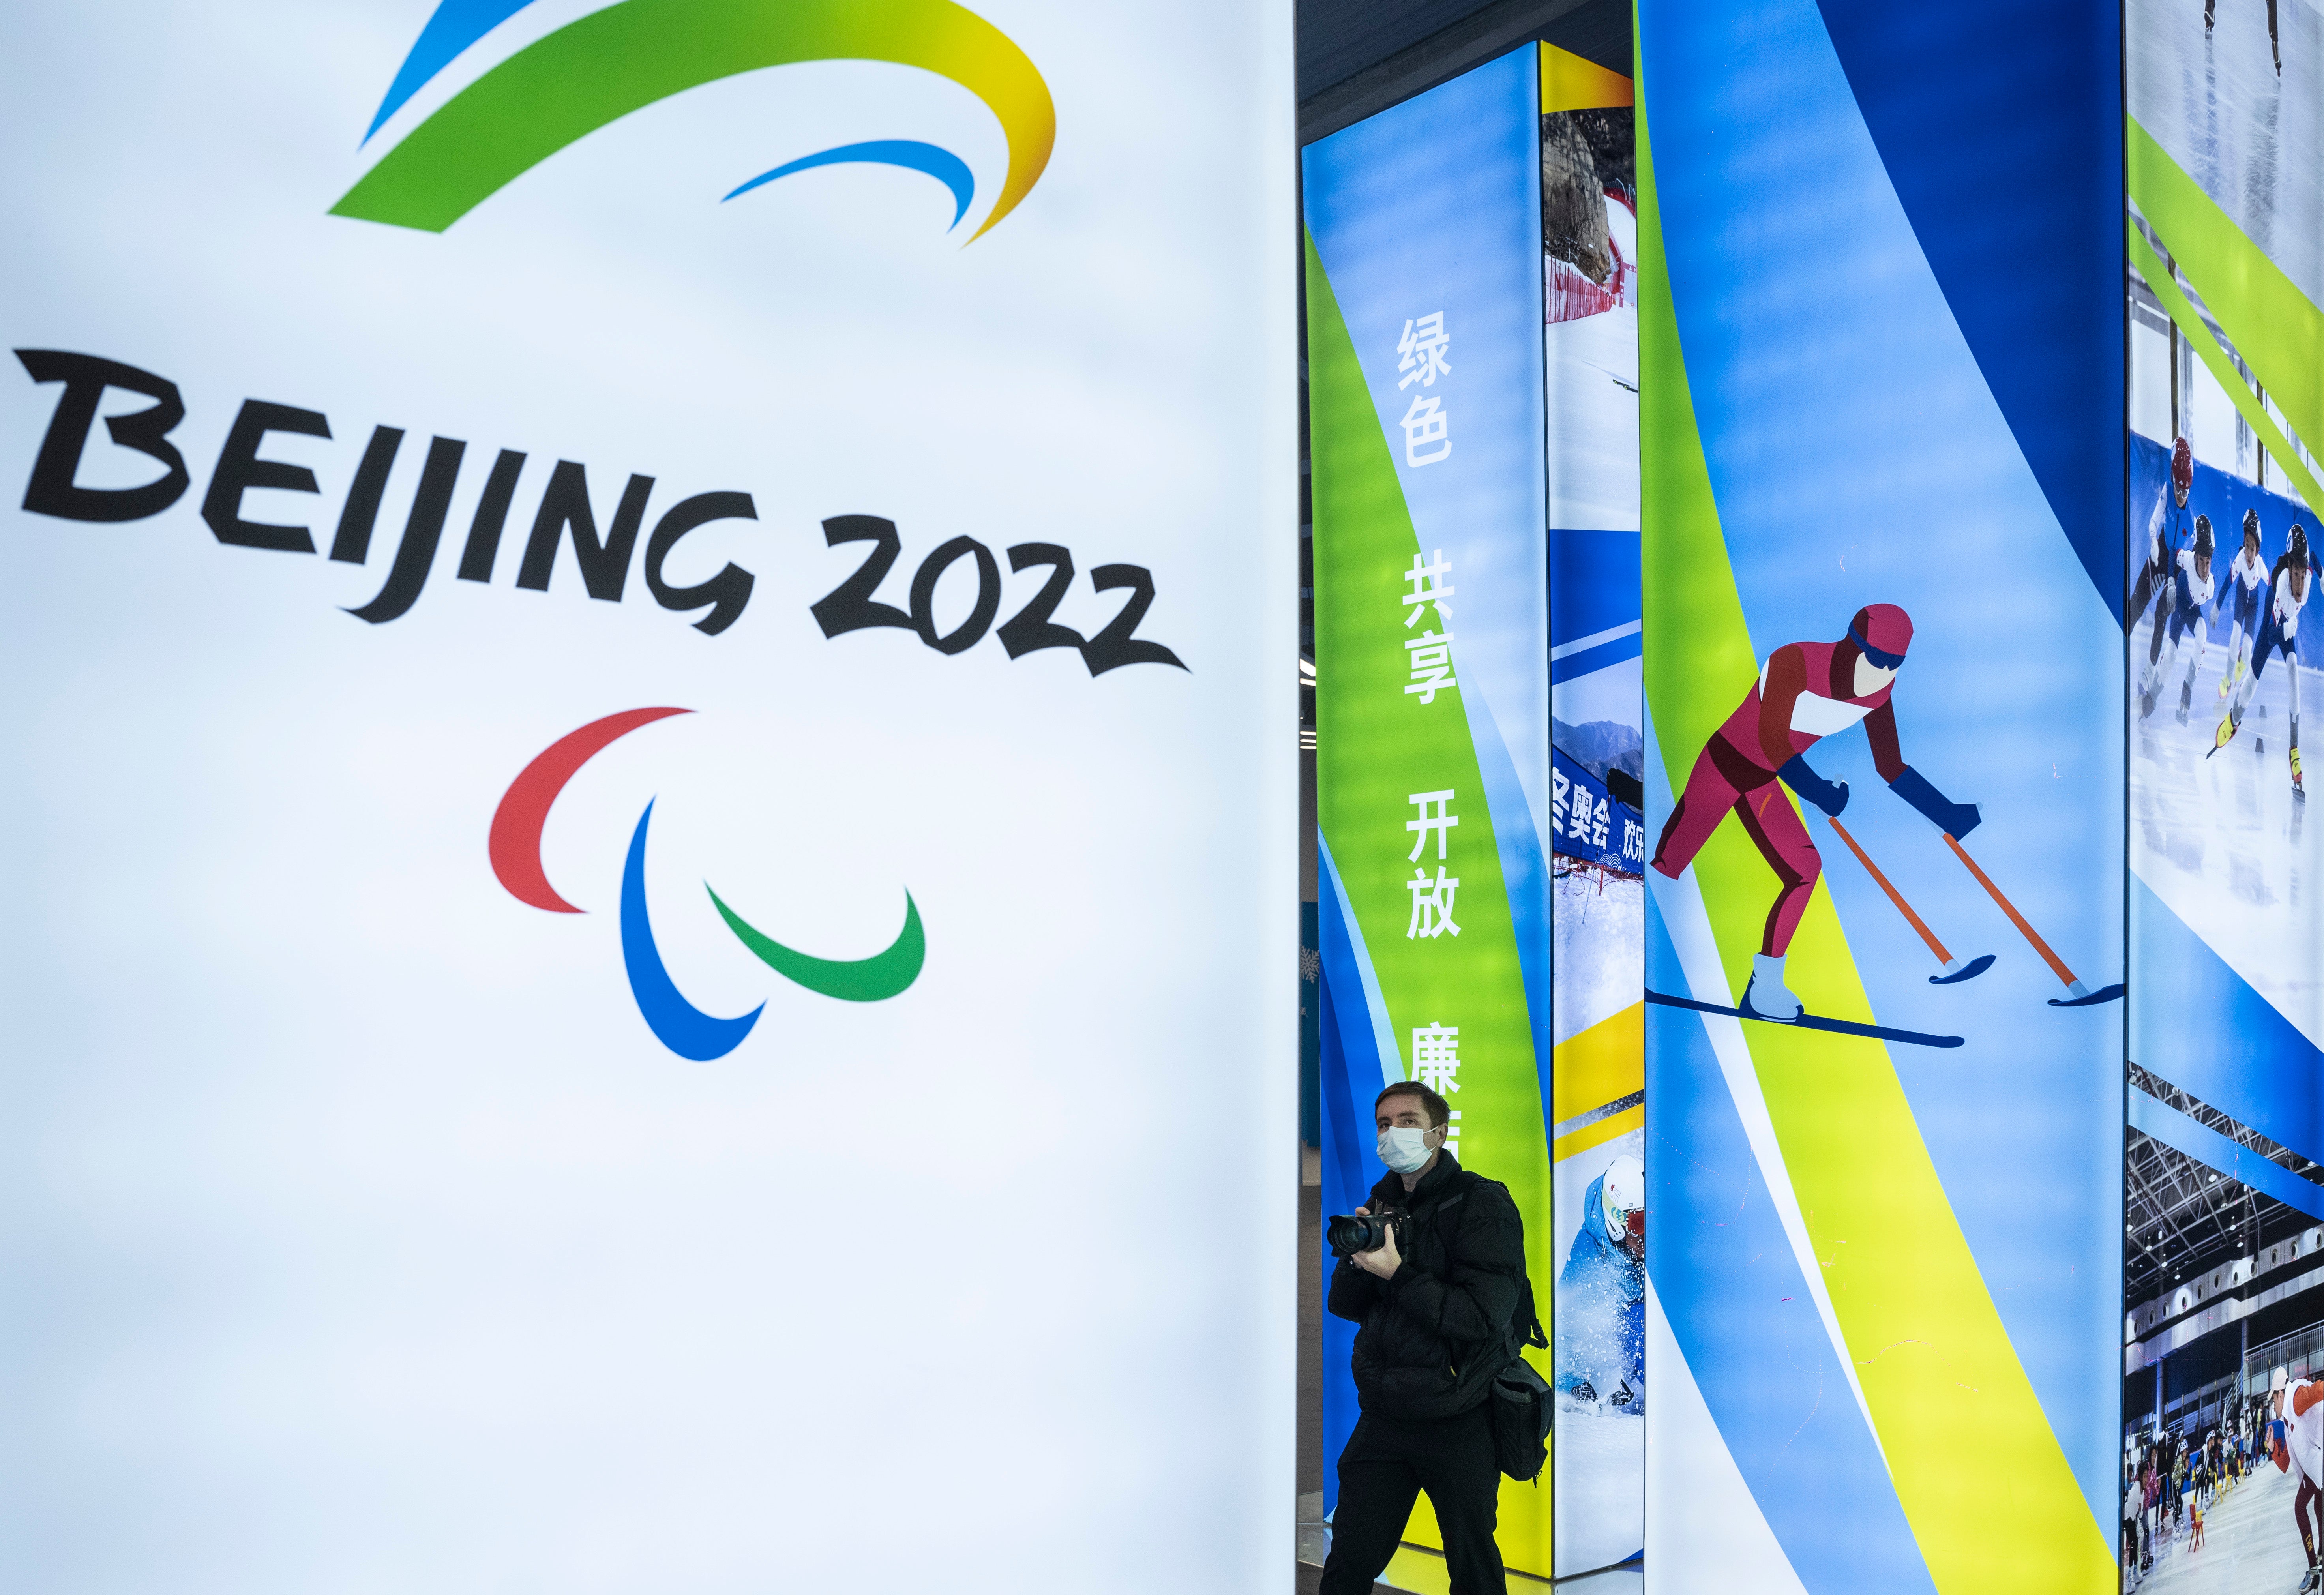 File photo: A display at the exhibition center for the 2022 Winter Olympics in Beijing, China, 5 February 2021